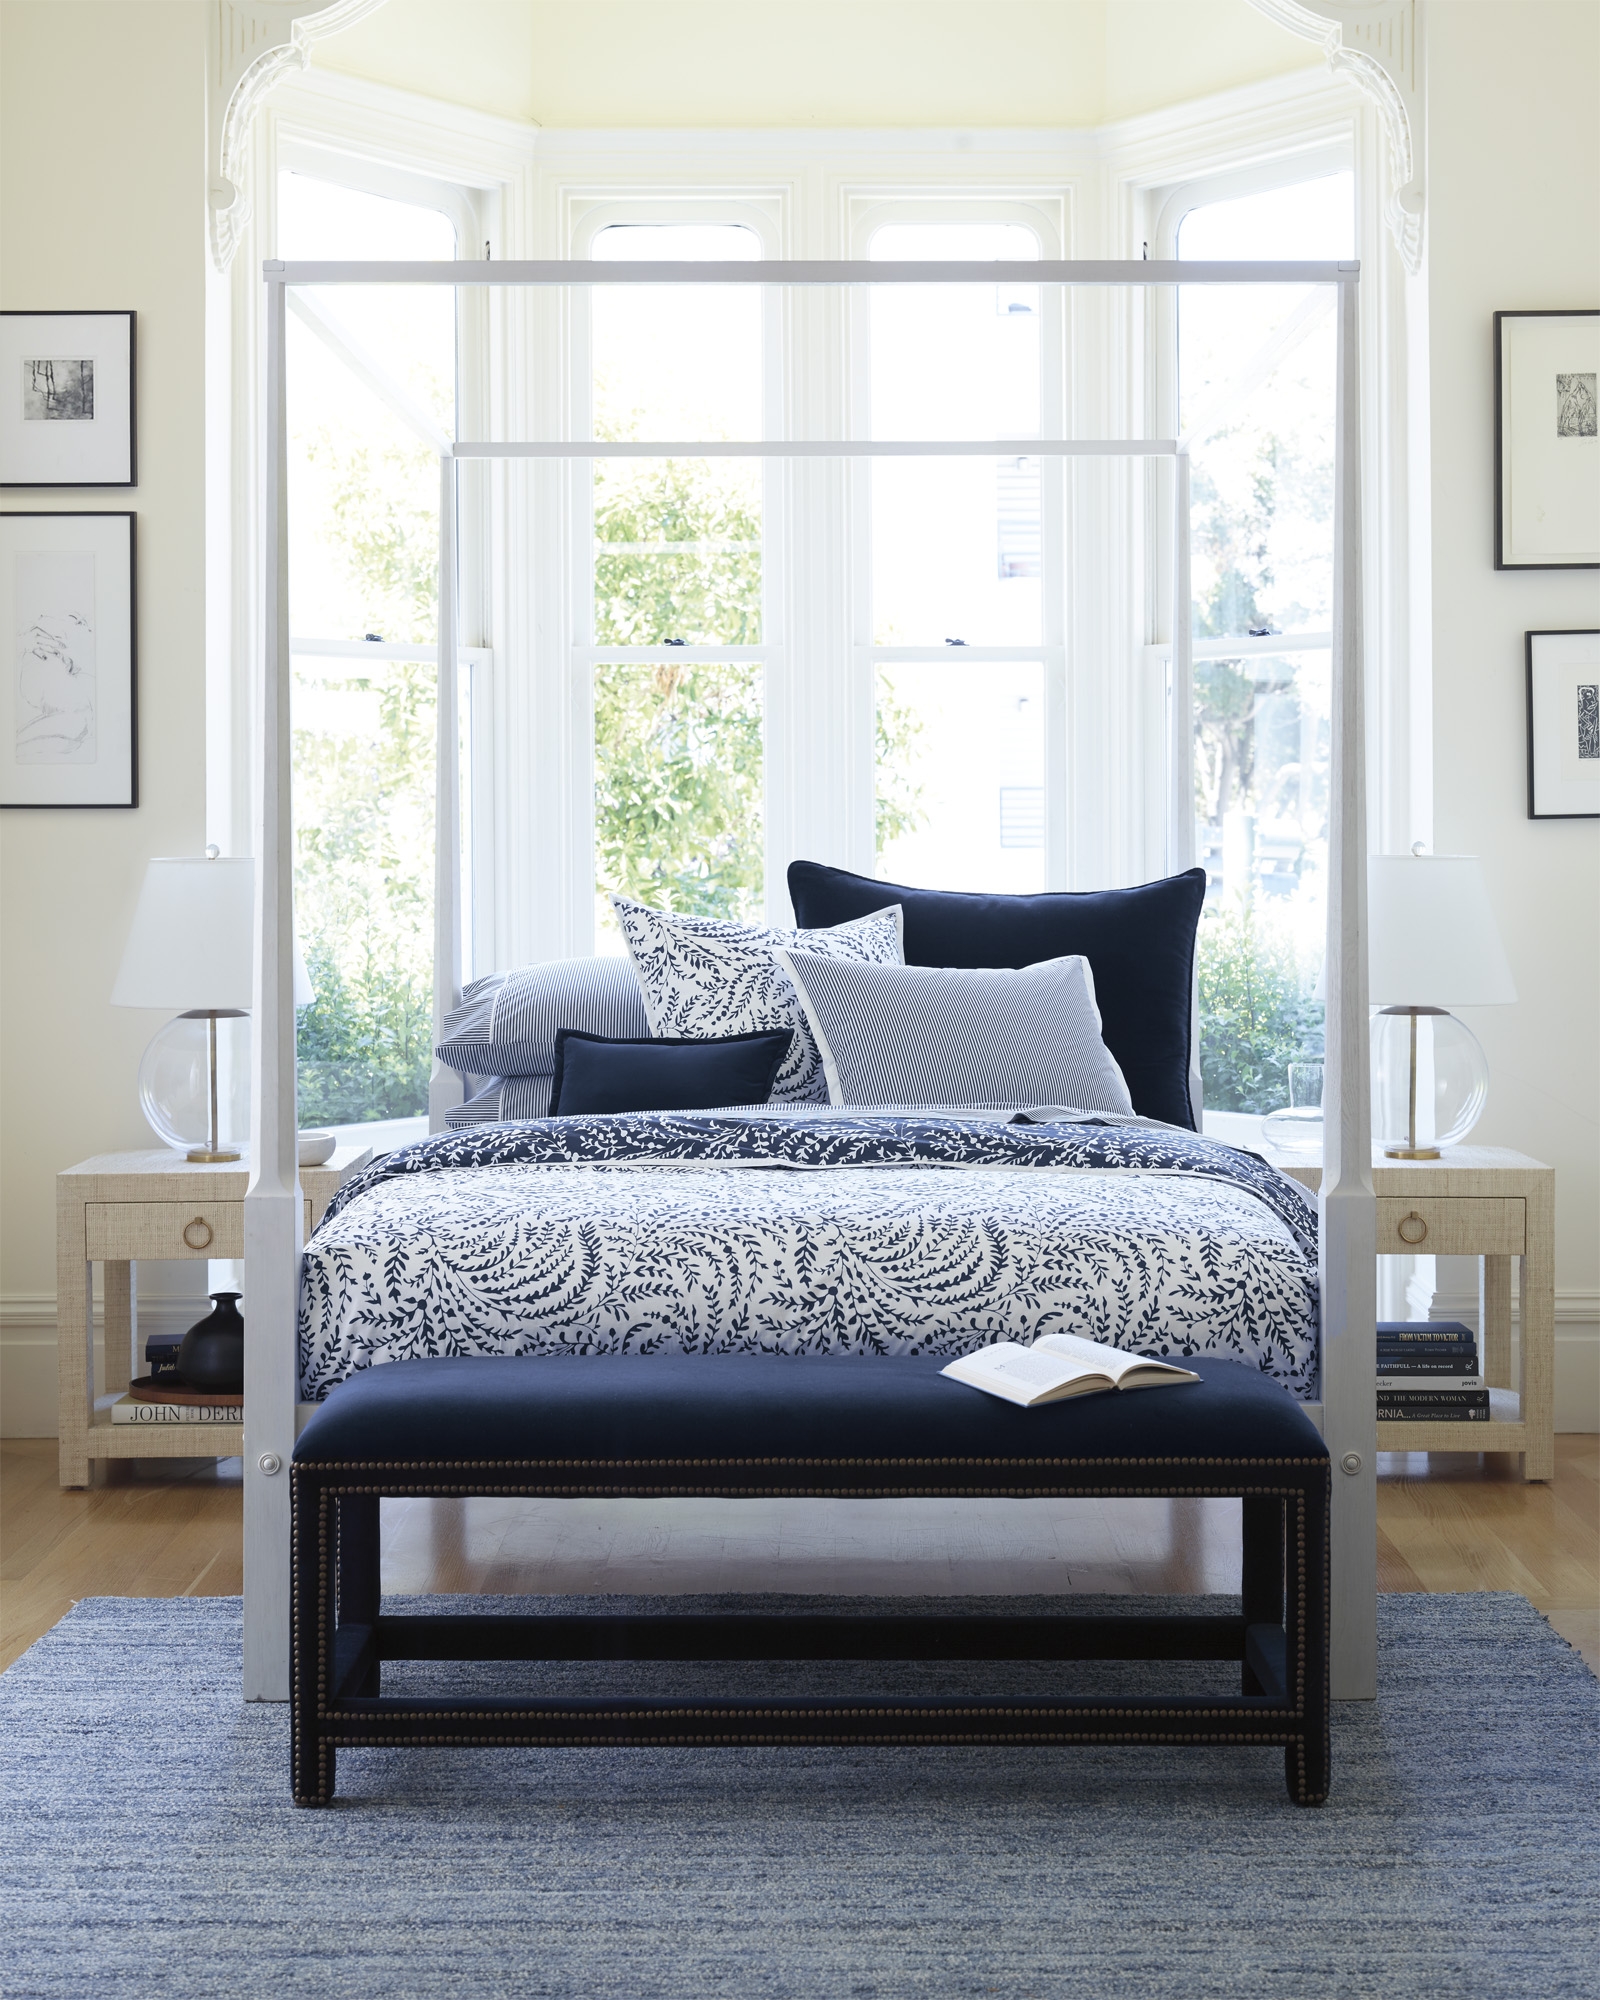 Priano King/Cal King Duvet Cover - Navy - Insert sold separately - Image 1